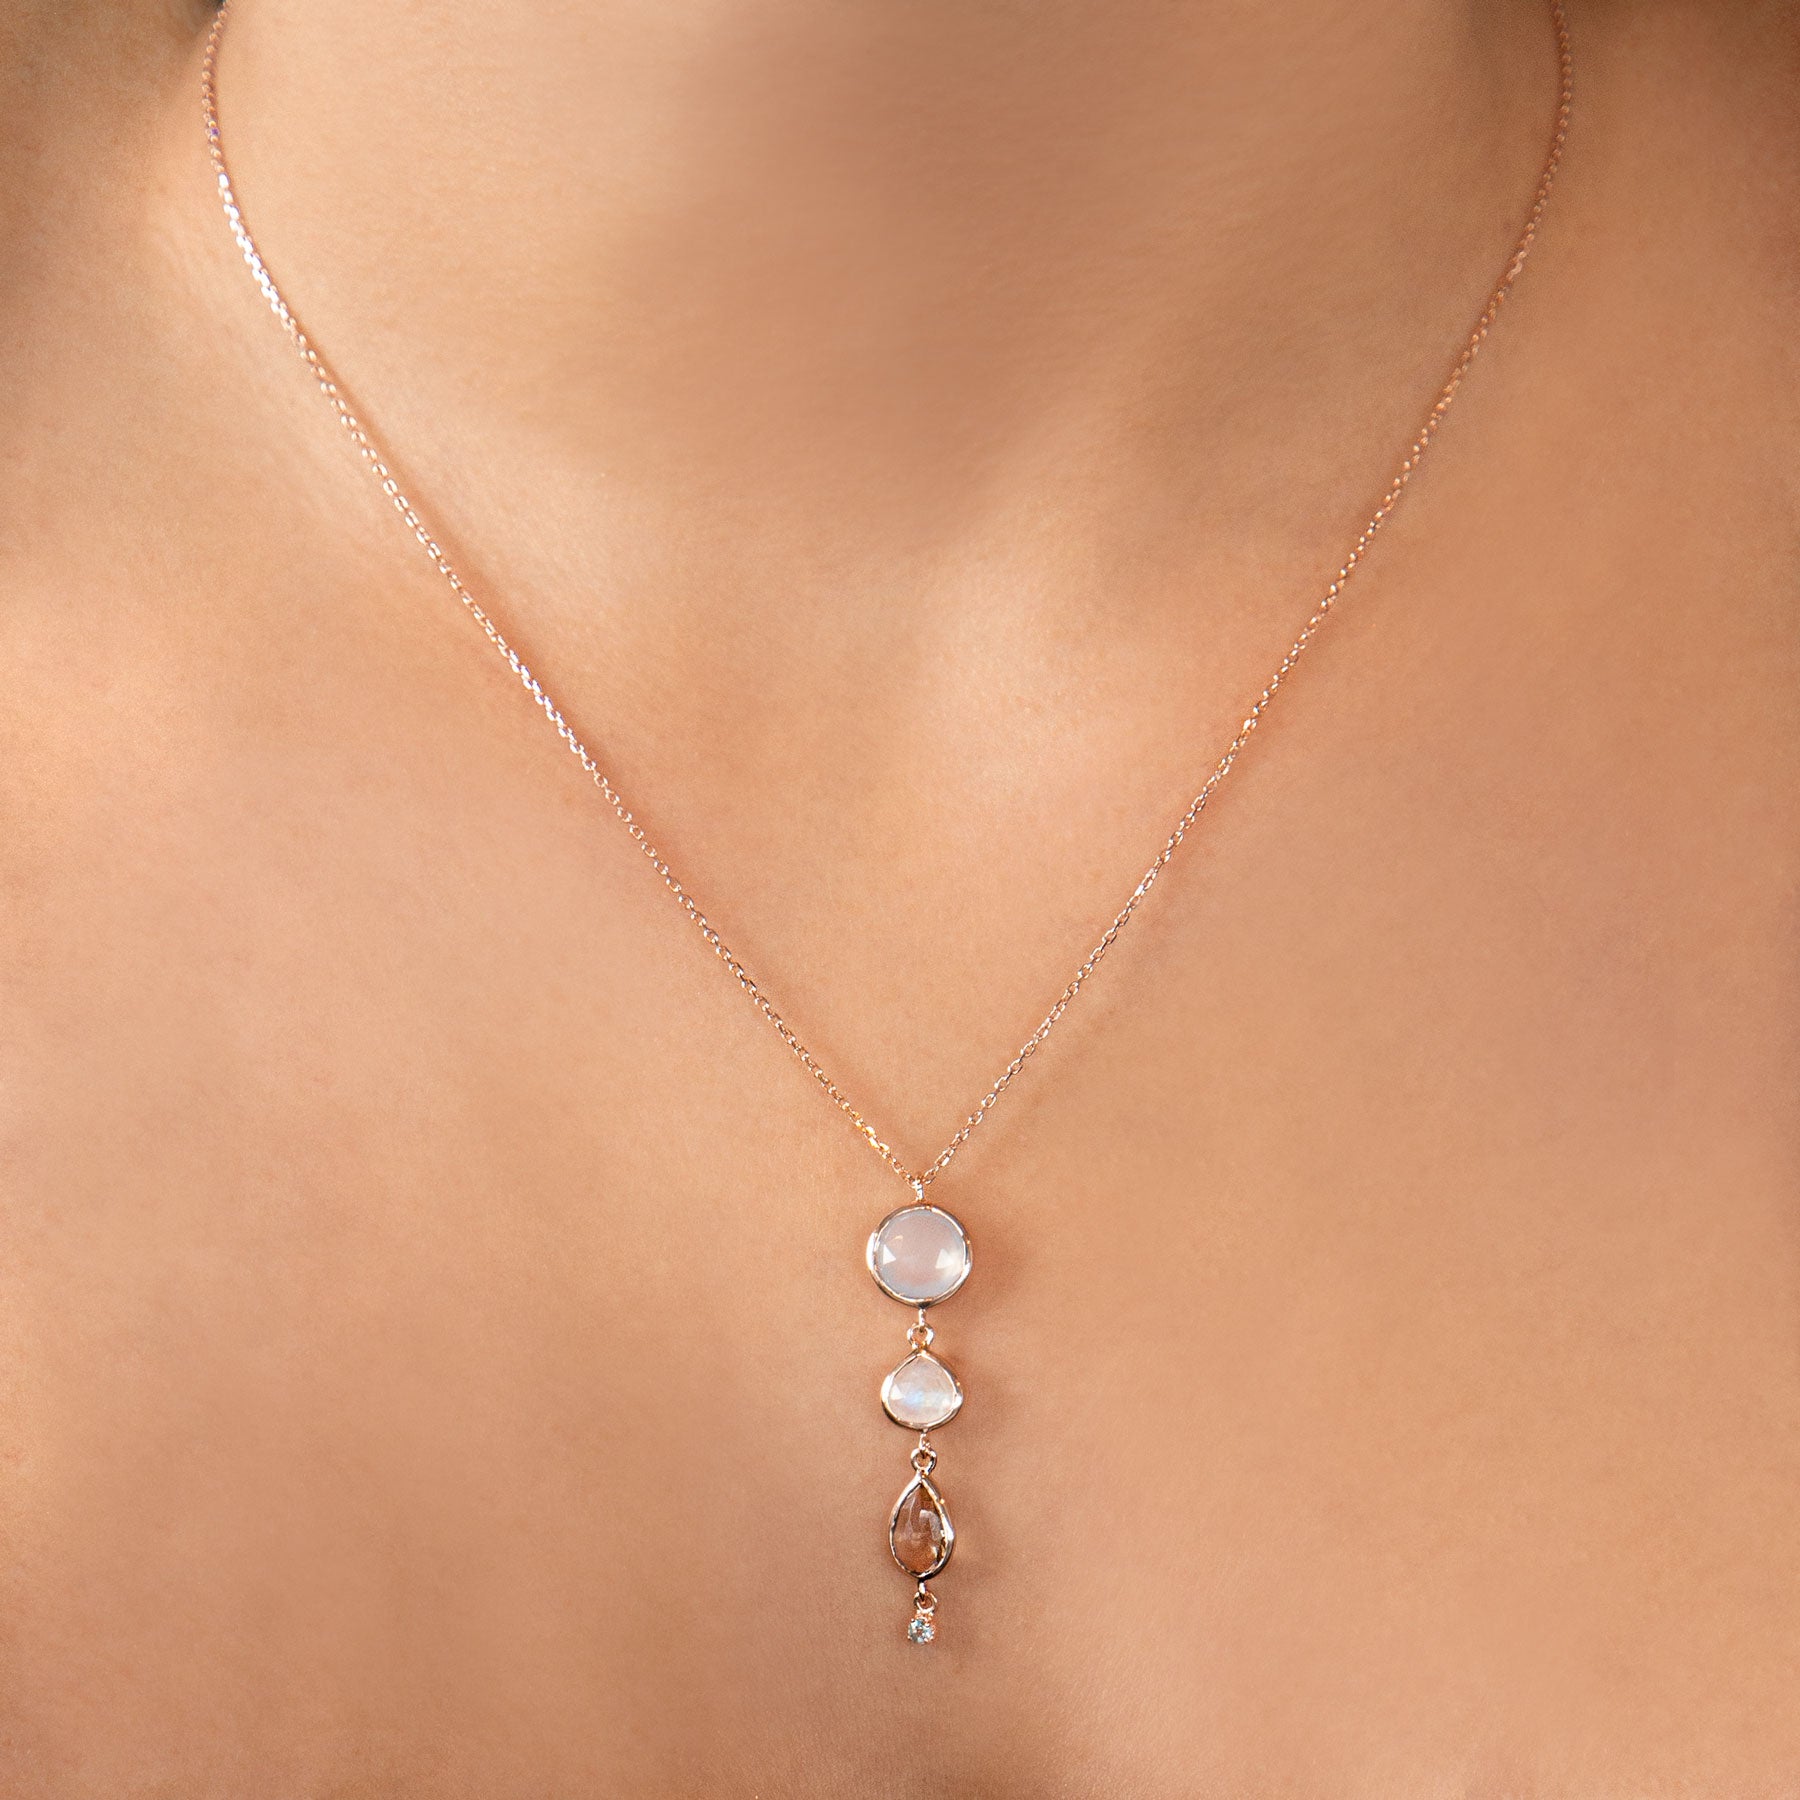 925 ROSE GOLD PLATED MOONSTONE, CHALCEDONY AND SMOKEY QUARZ